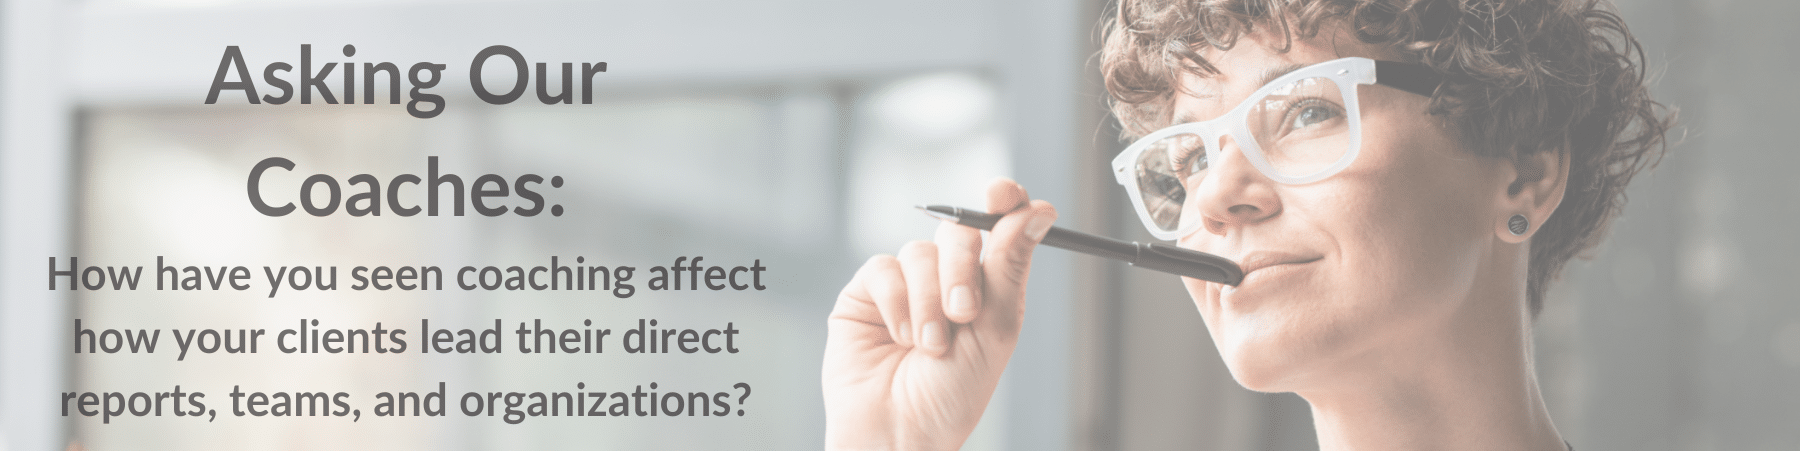 "Asking our coaches: How have you seen coaching affect how your clients lead their direct reports, teams, and organizations" text by an image of a woman pondering.